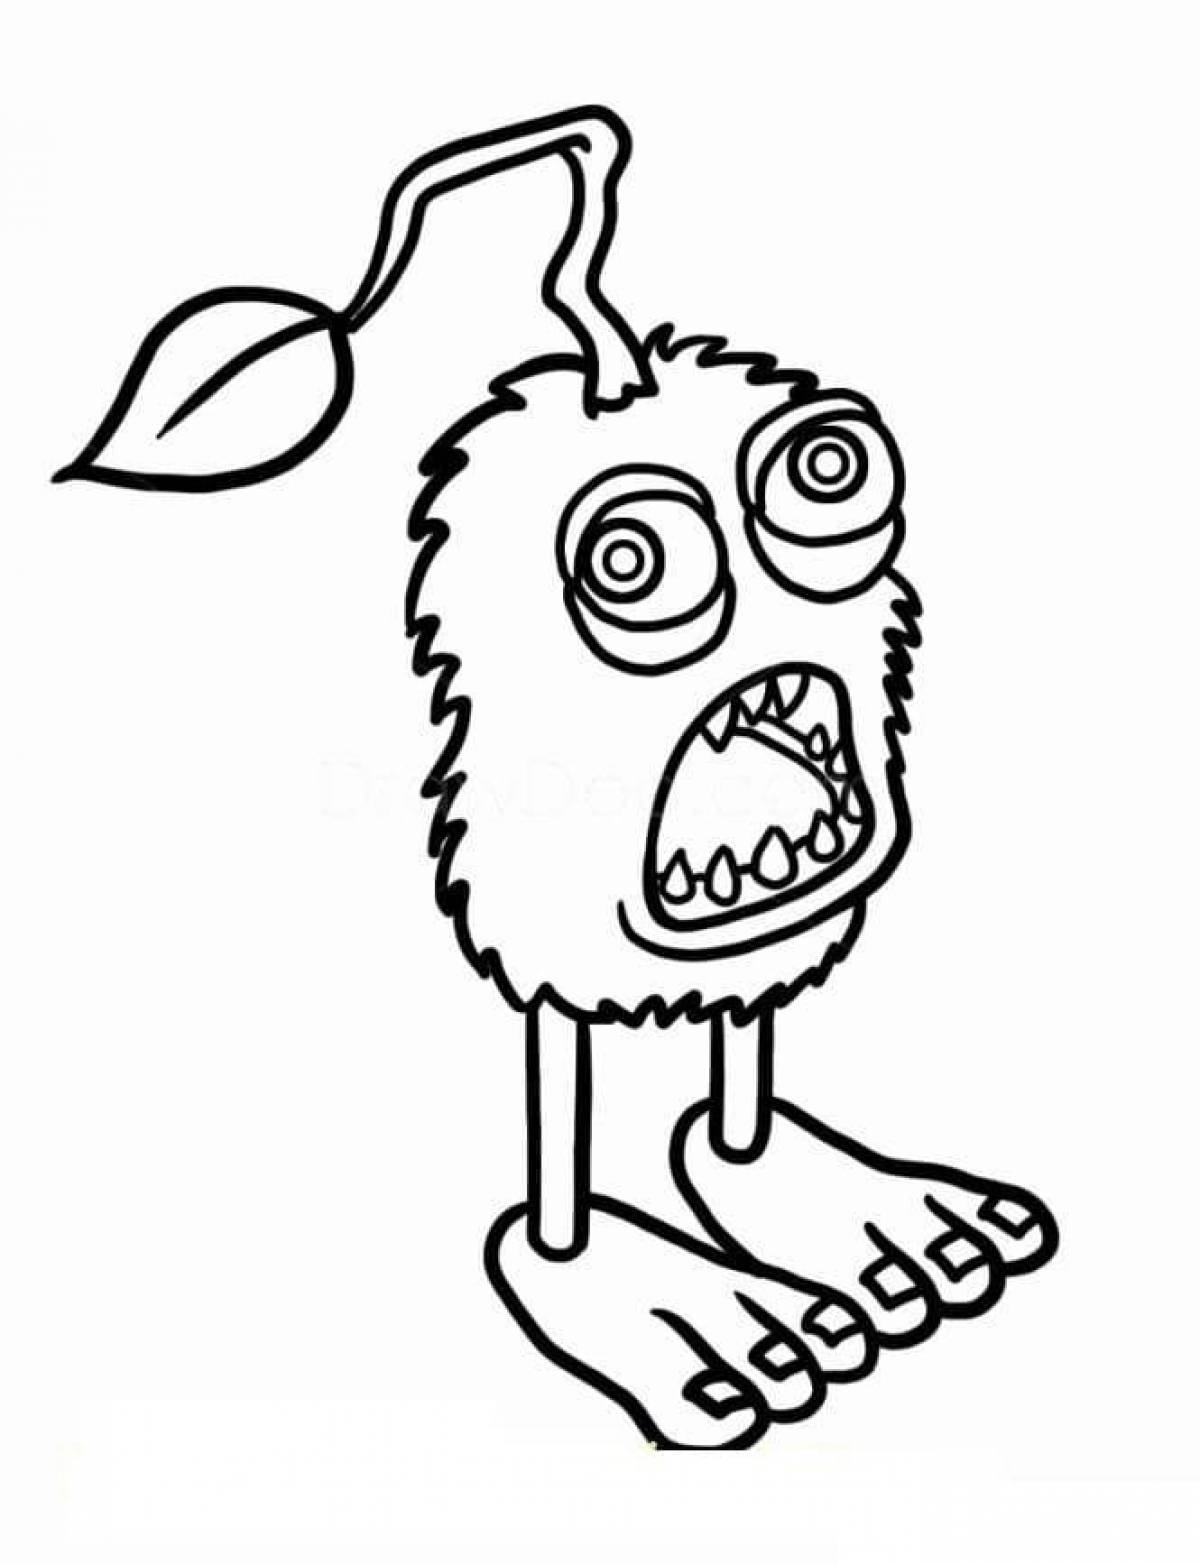 Exciting singing monster coloring pages